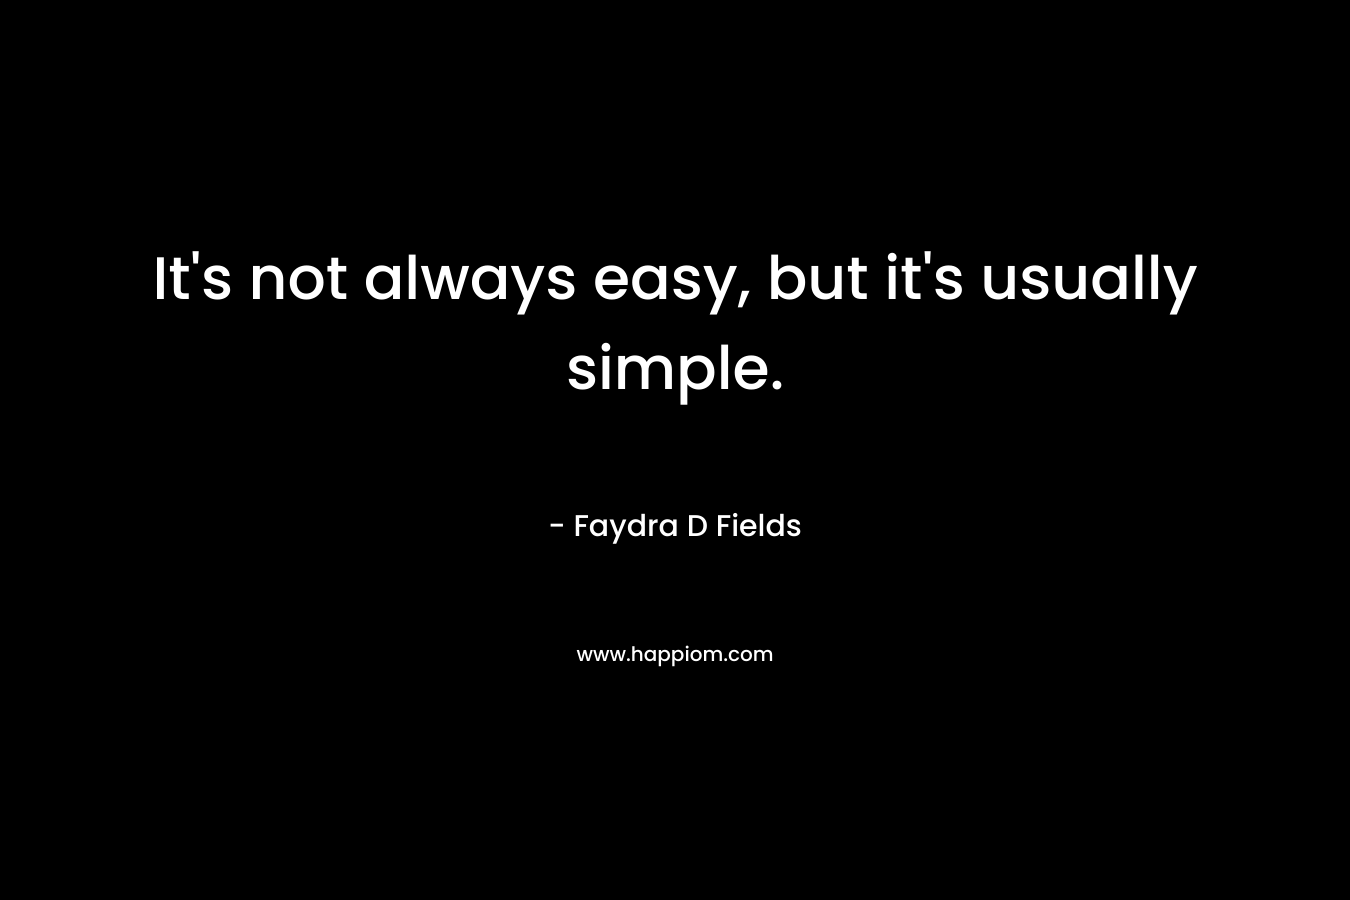 It’s not always easy, but it’s usually simple. – Faydra D Fields